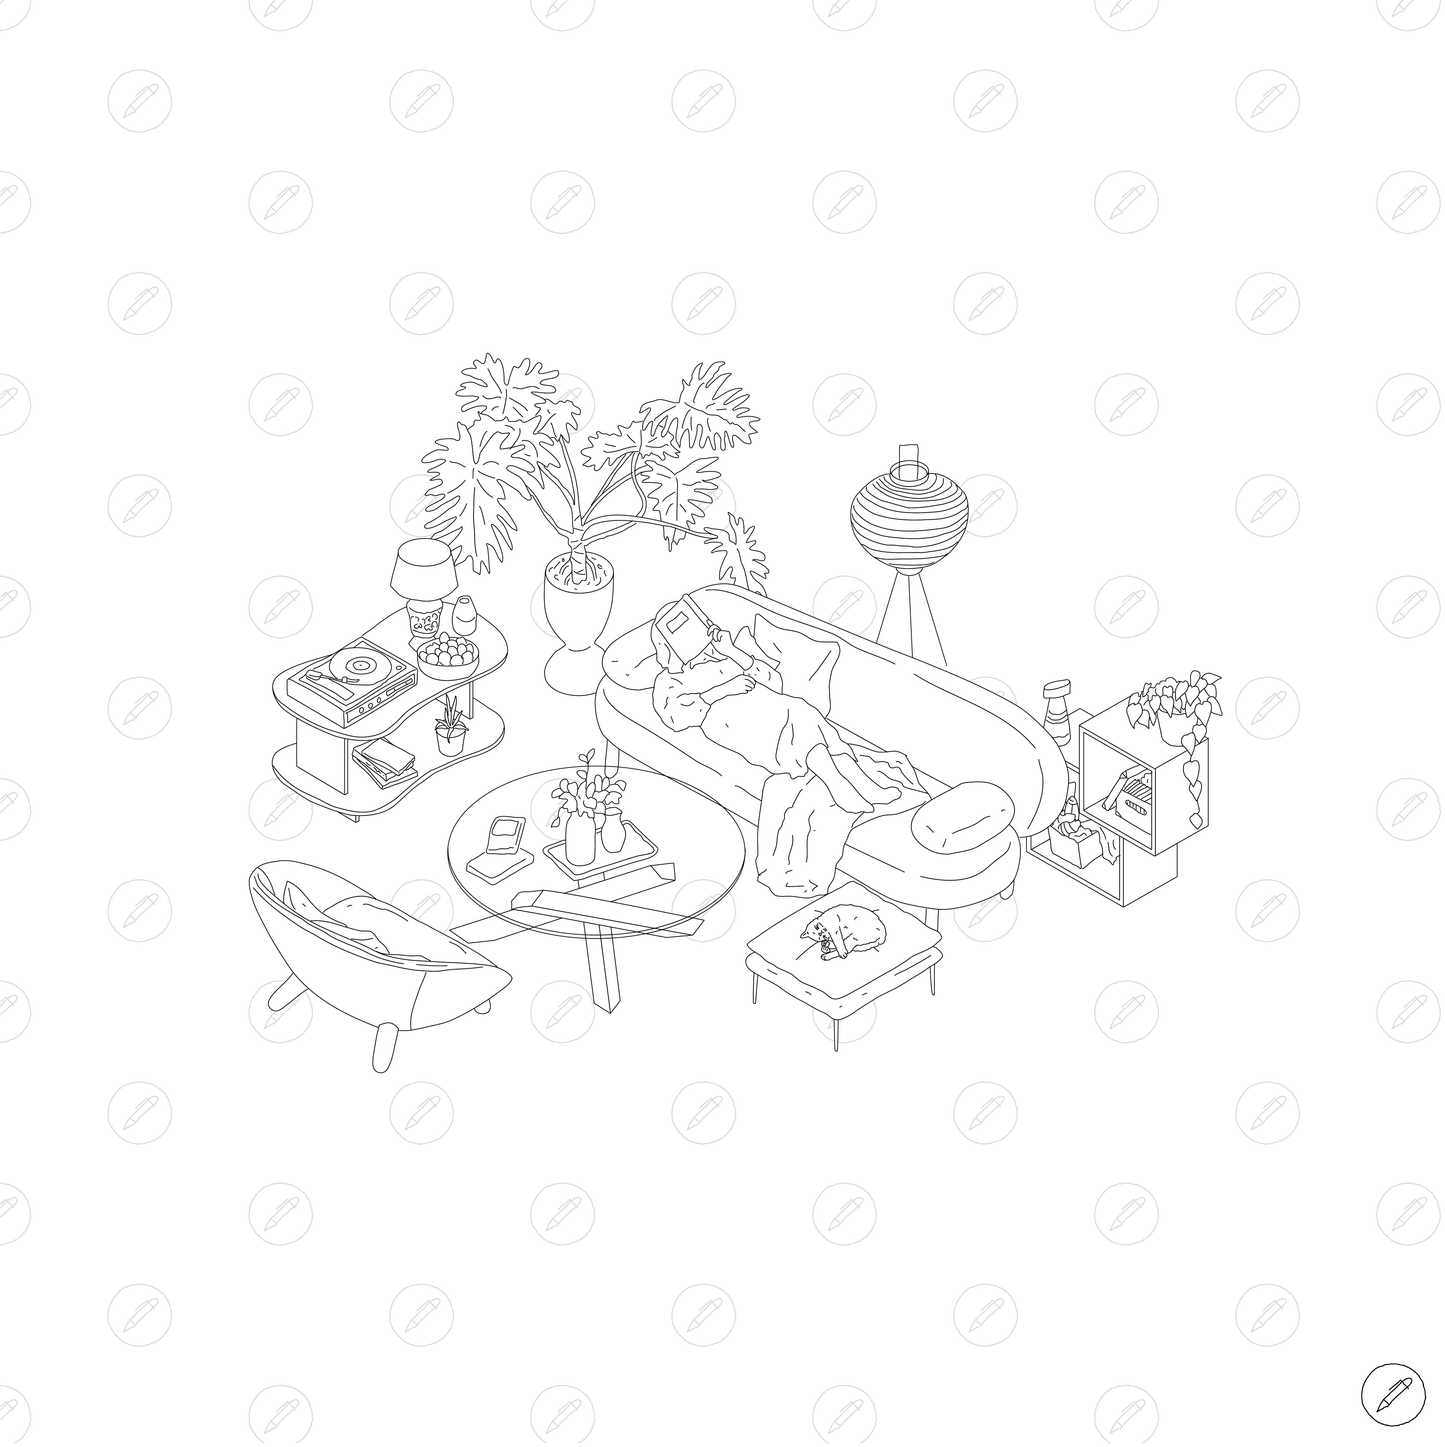 Cad & Vector - Isometric Living Room Furniture